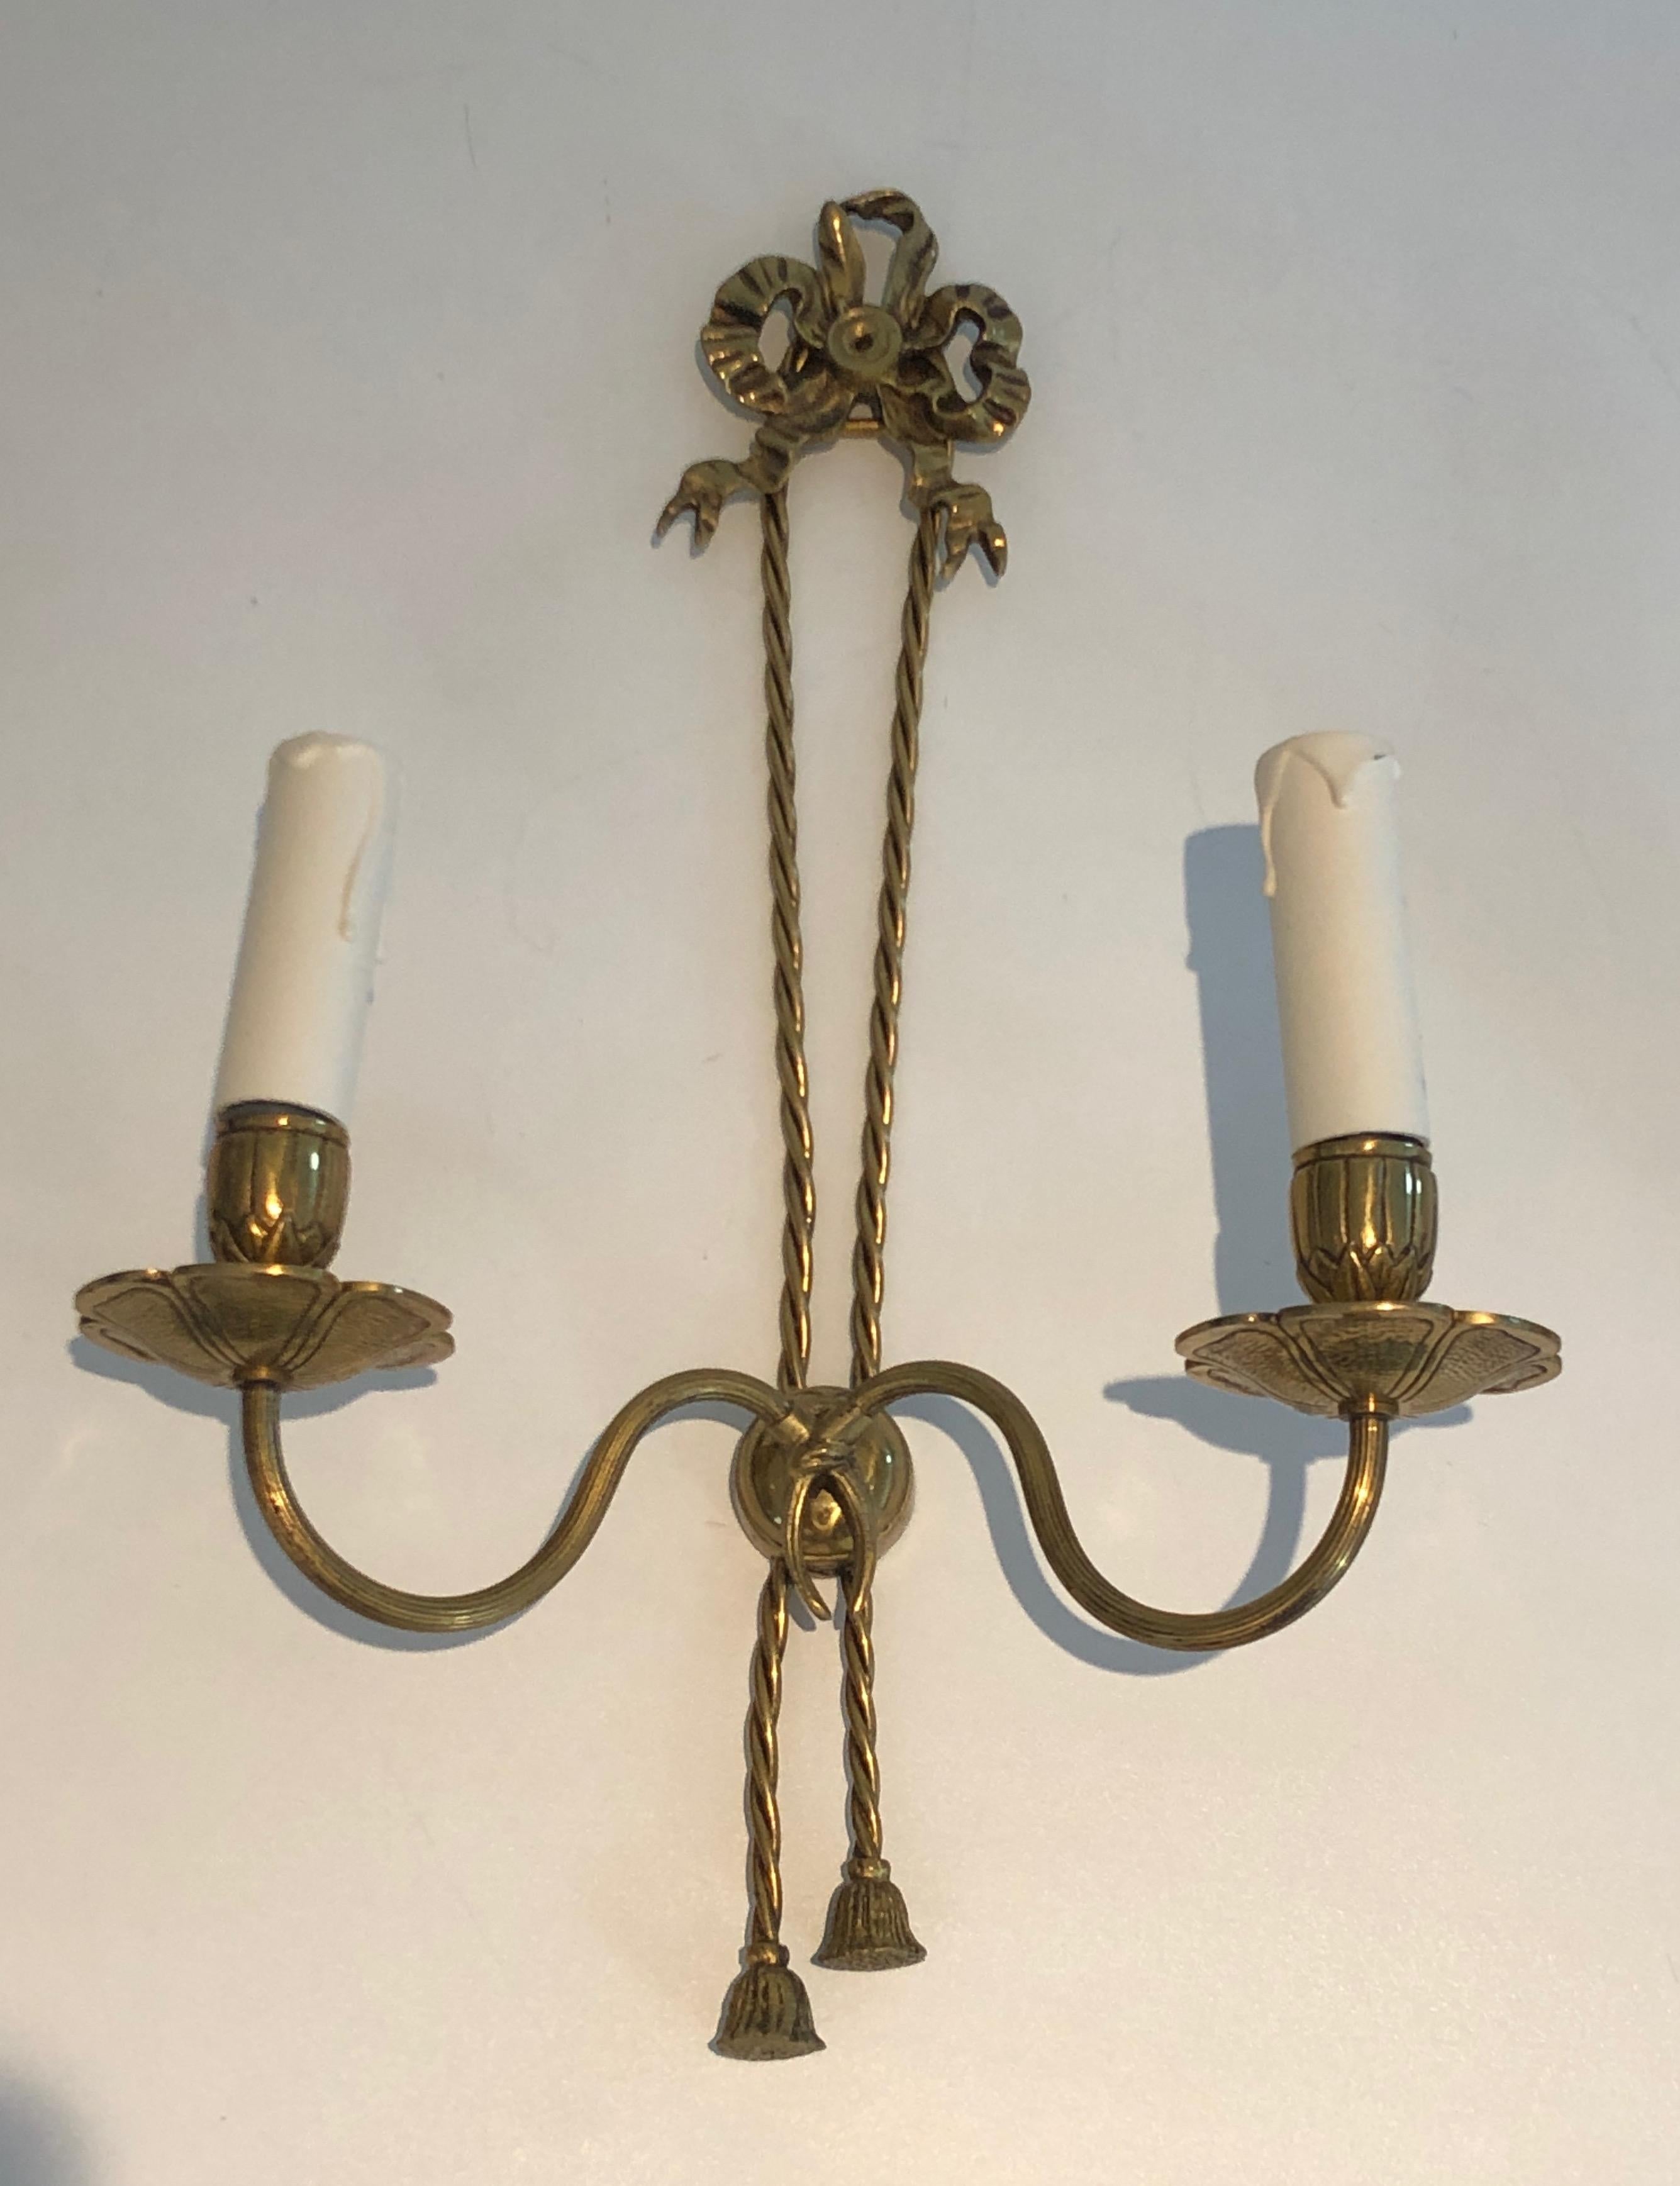 This pair of Louis the 16th style wall sconces is made of bronze. These wall lights are very decorative, they have a large noddle on top with twisted ribbons going from top to bottom. This is a French work, circa 1950.